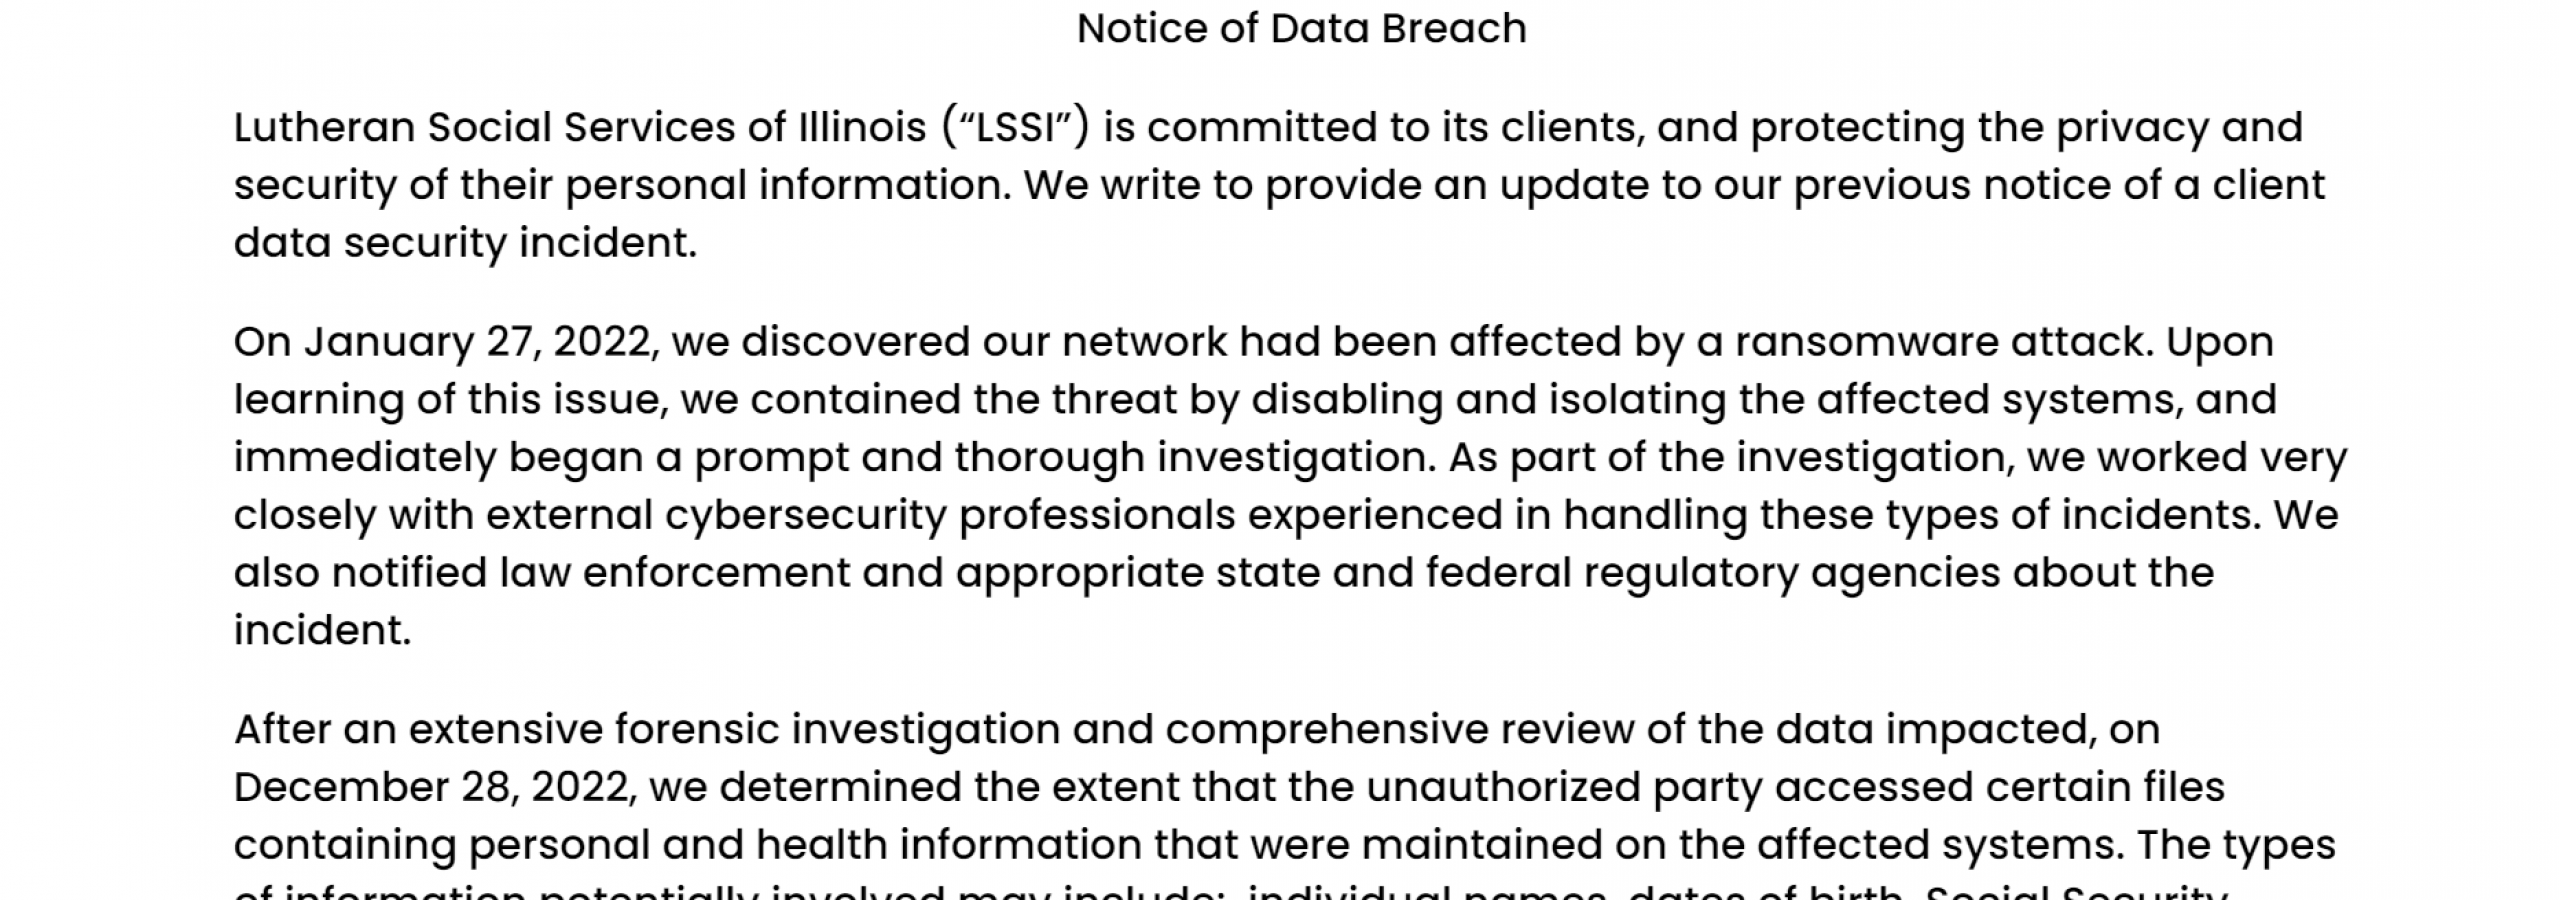 photo of lutheran social services of illinois data breach notice